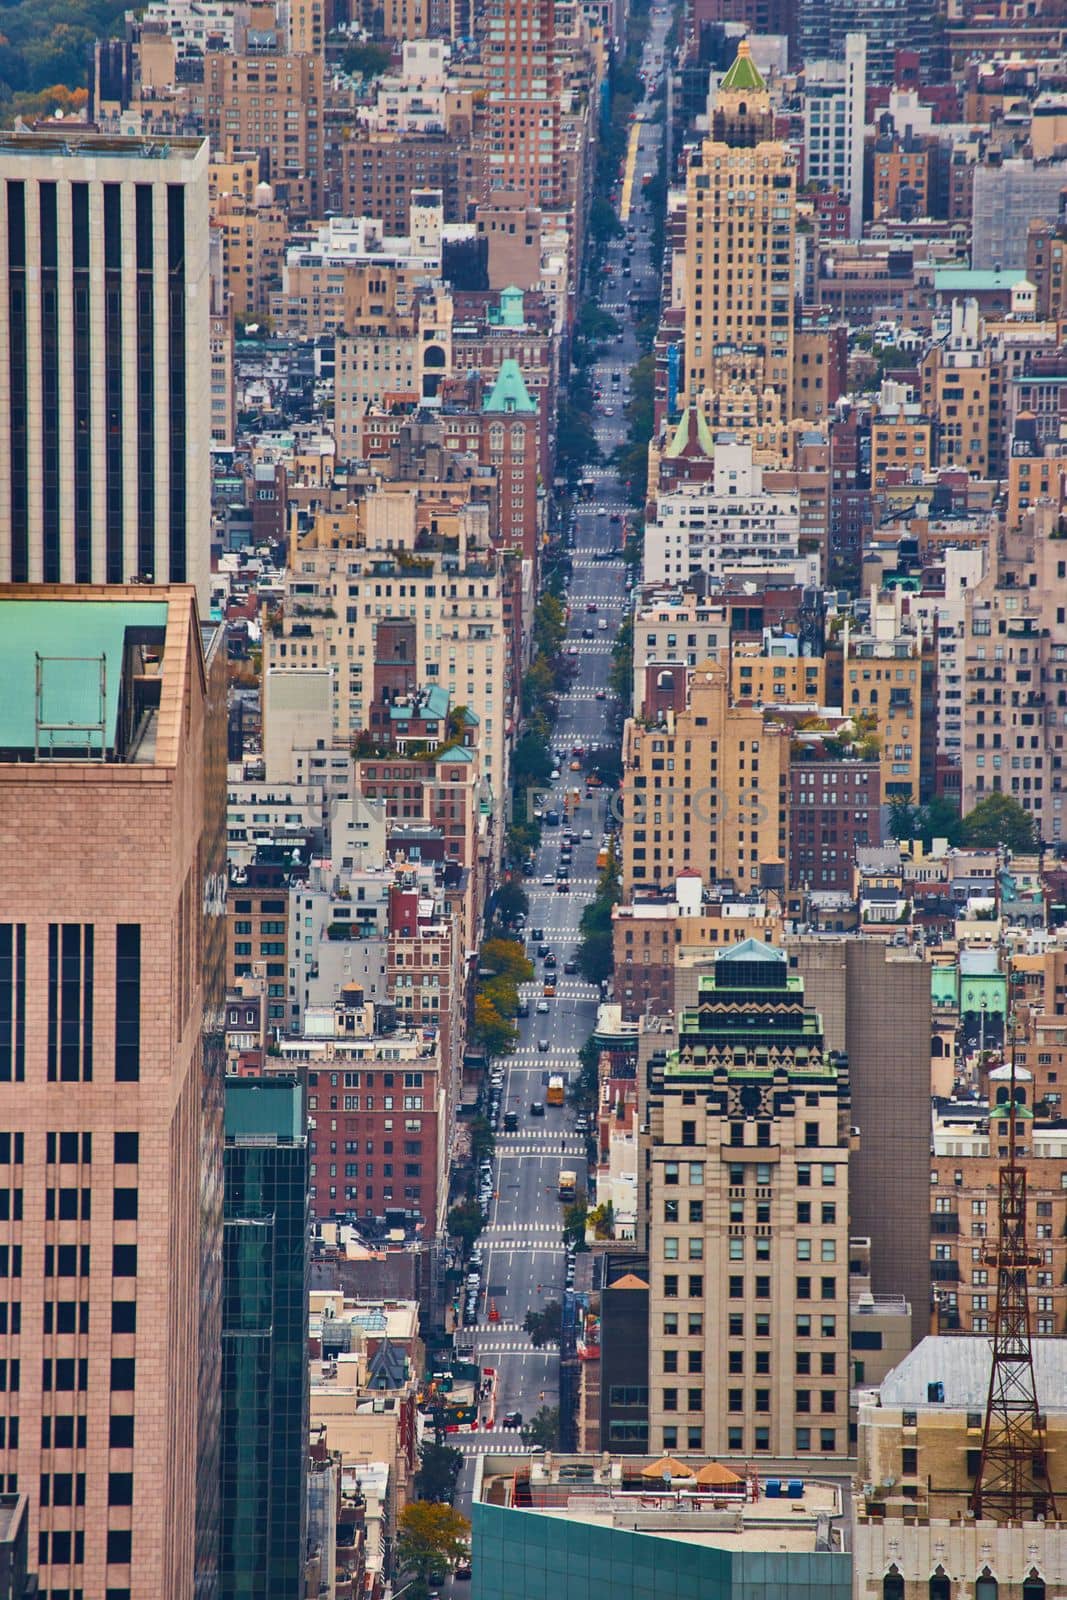 Image of Looking down long New York City street from above lined with small skyscrapers in soft light